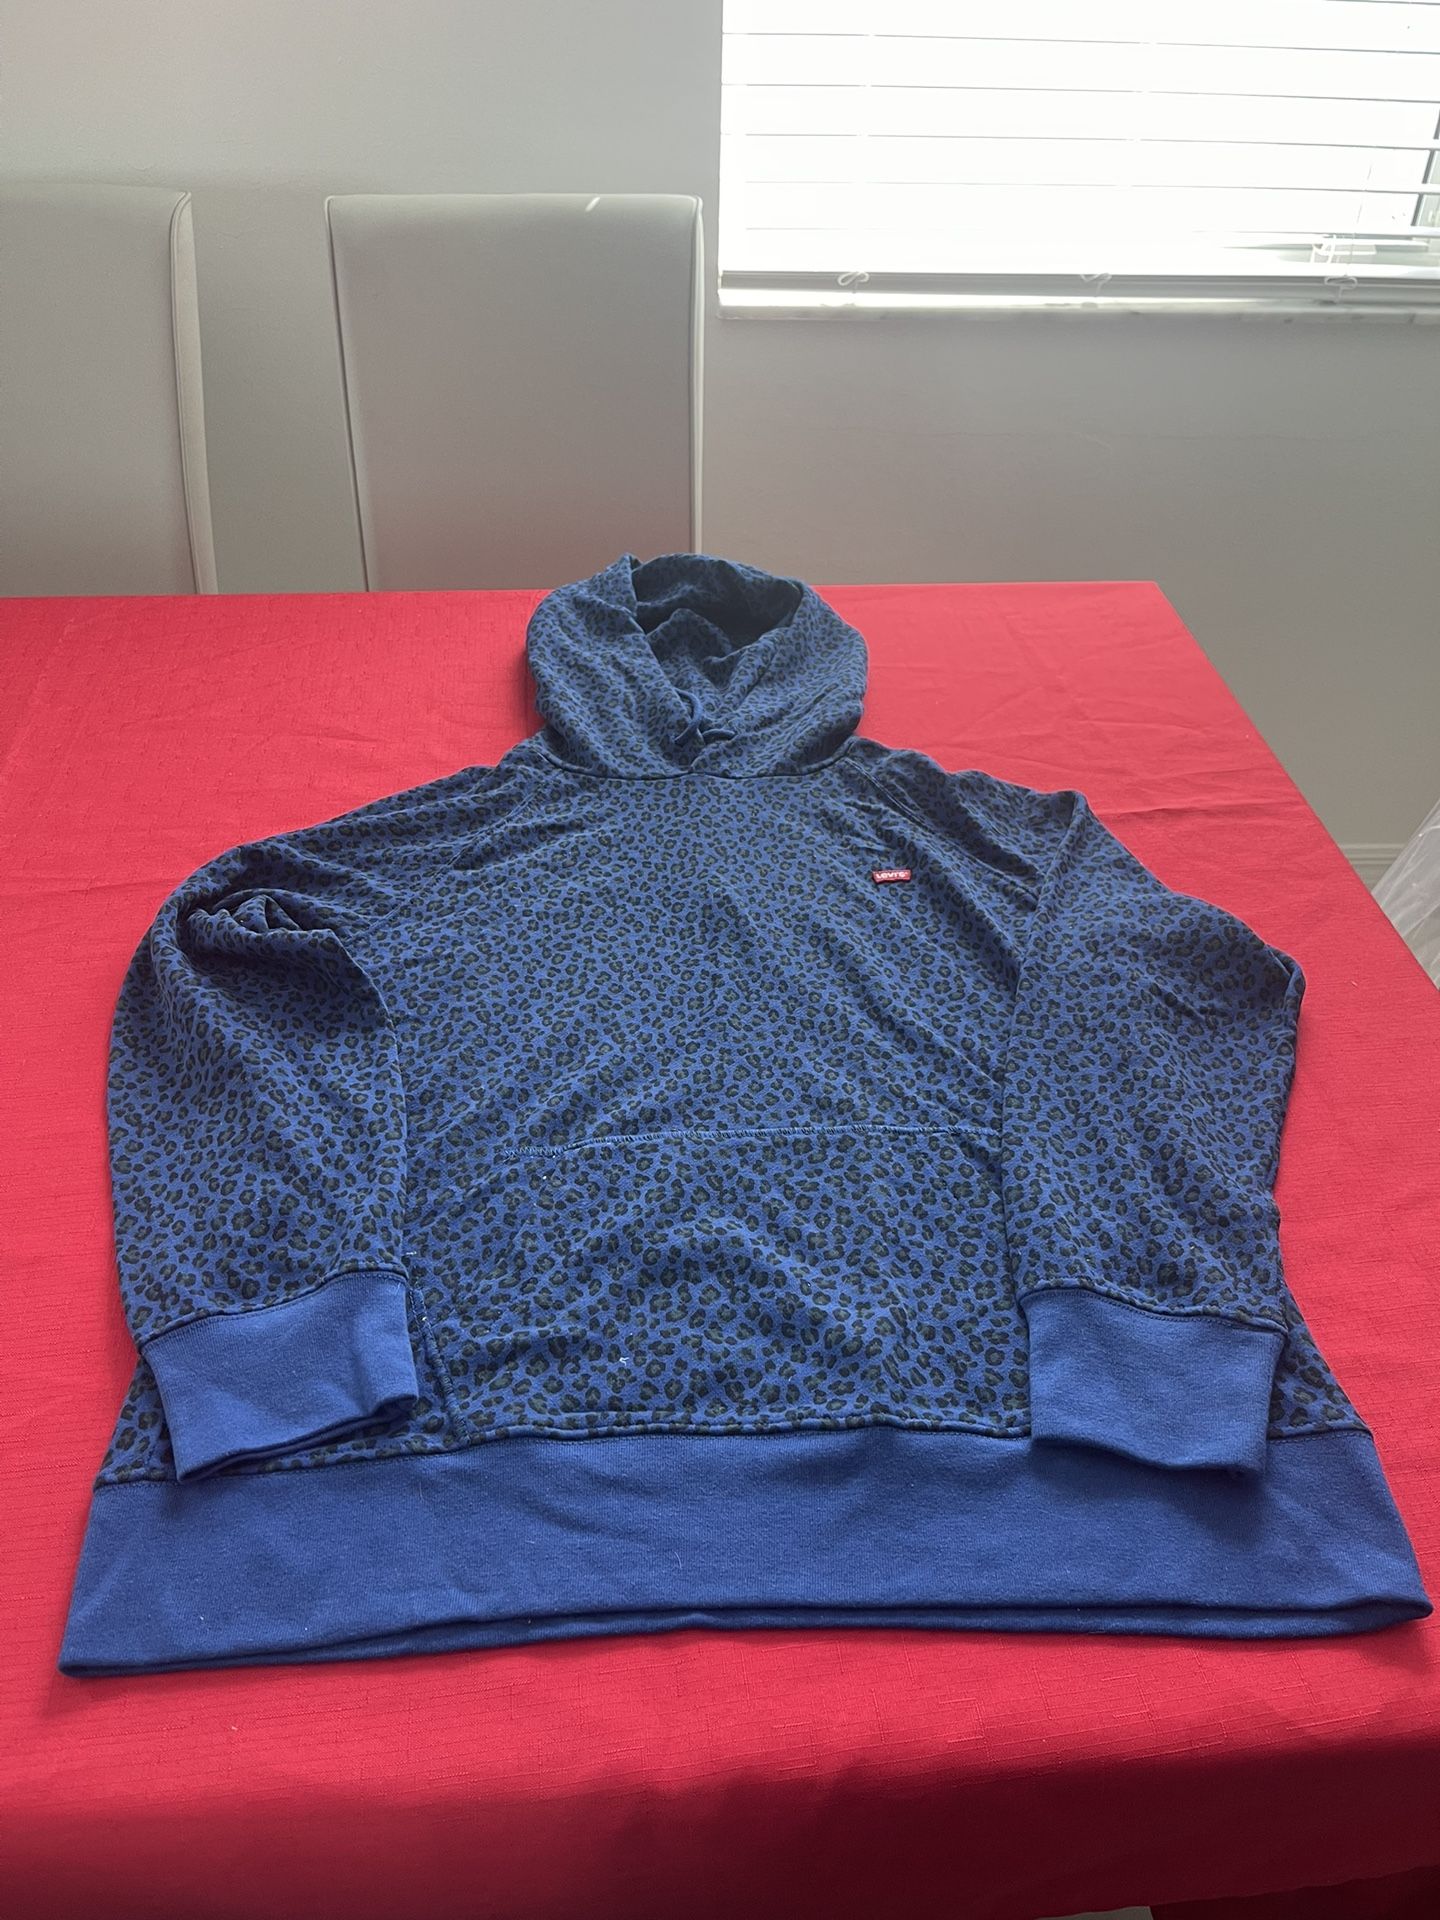 Levi’s Hooded Sweater